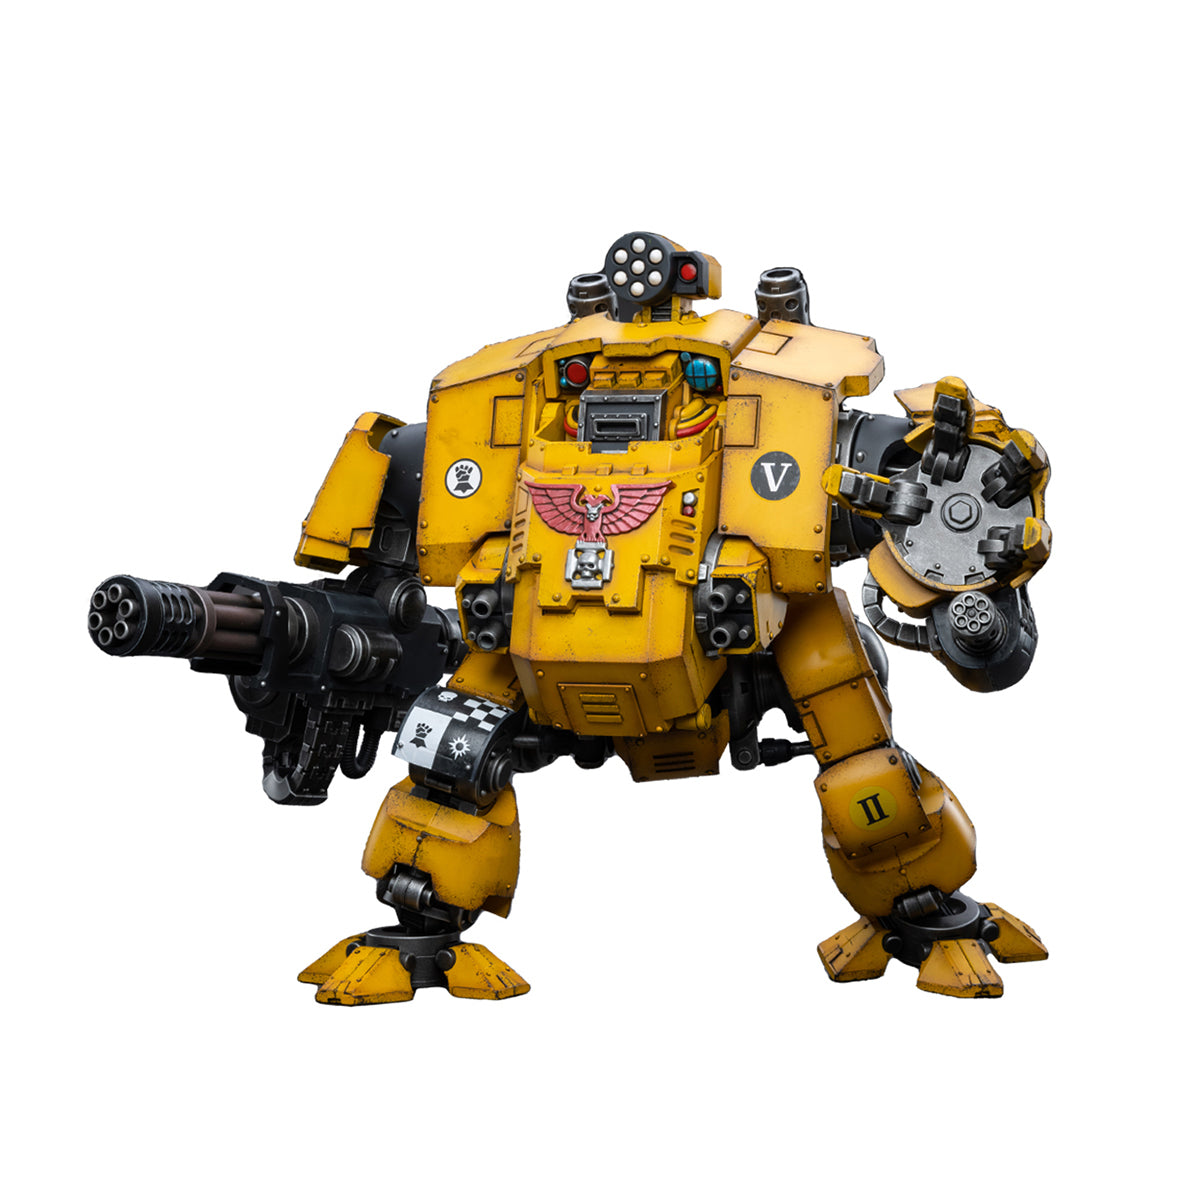 Imperial Fists Redemptor Dreadnought (Warhammer 40K)